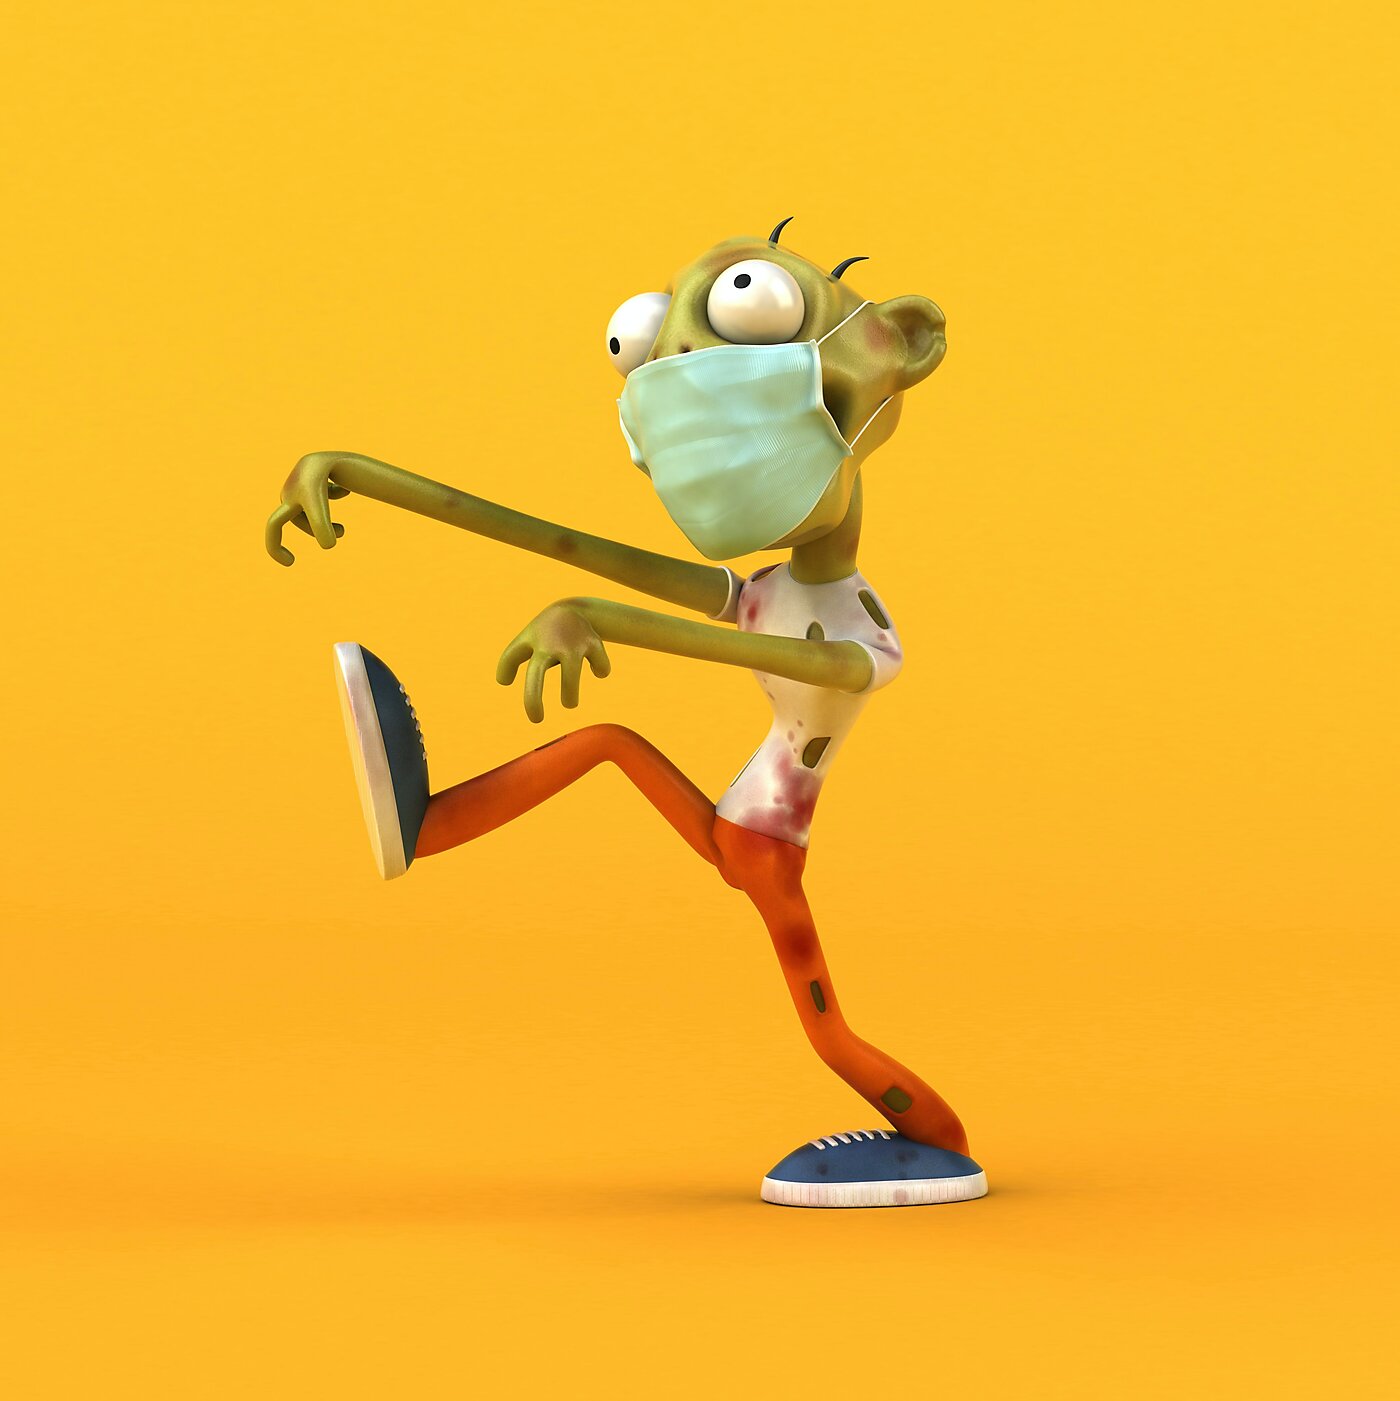 Cartoon zombie walking off-balance with arms stretched out in front